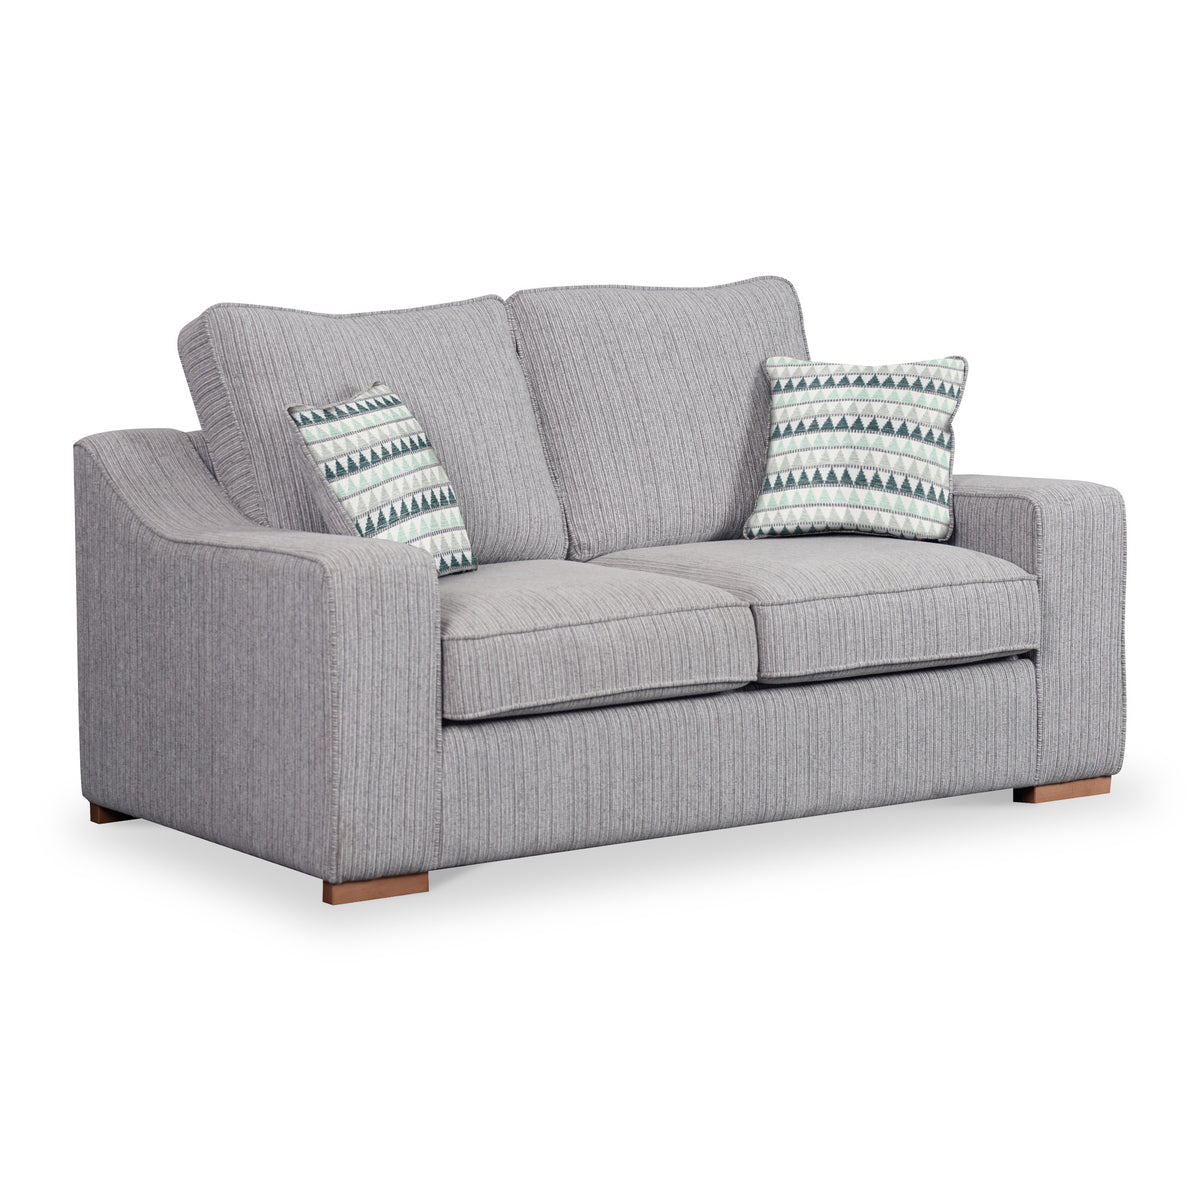 Ashow Silver 2 Seater Sofabed with Jade Dusk Scatter Cushions from Roseland Furniture